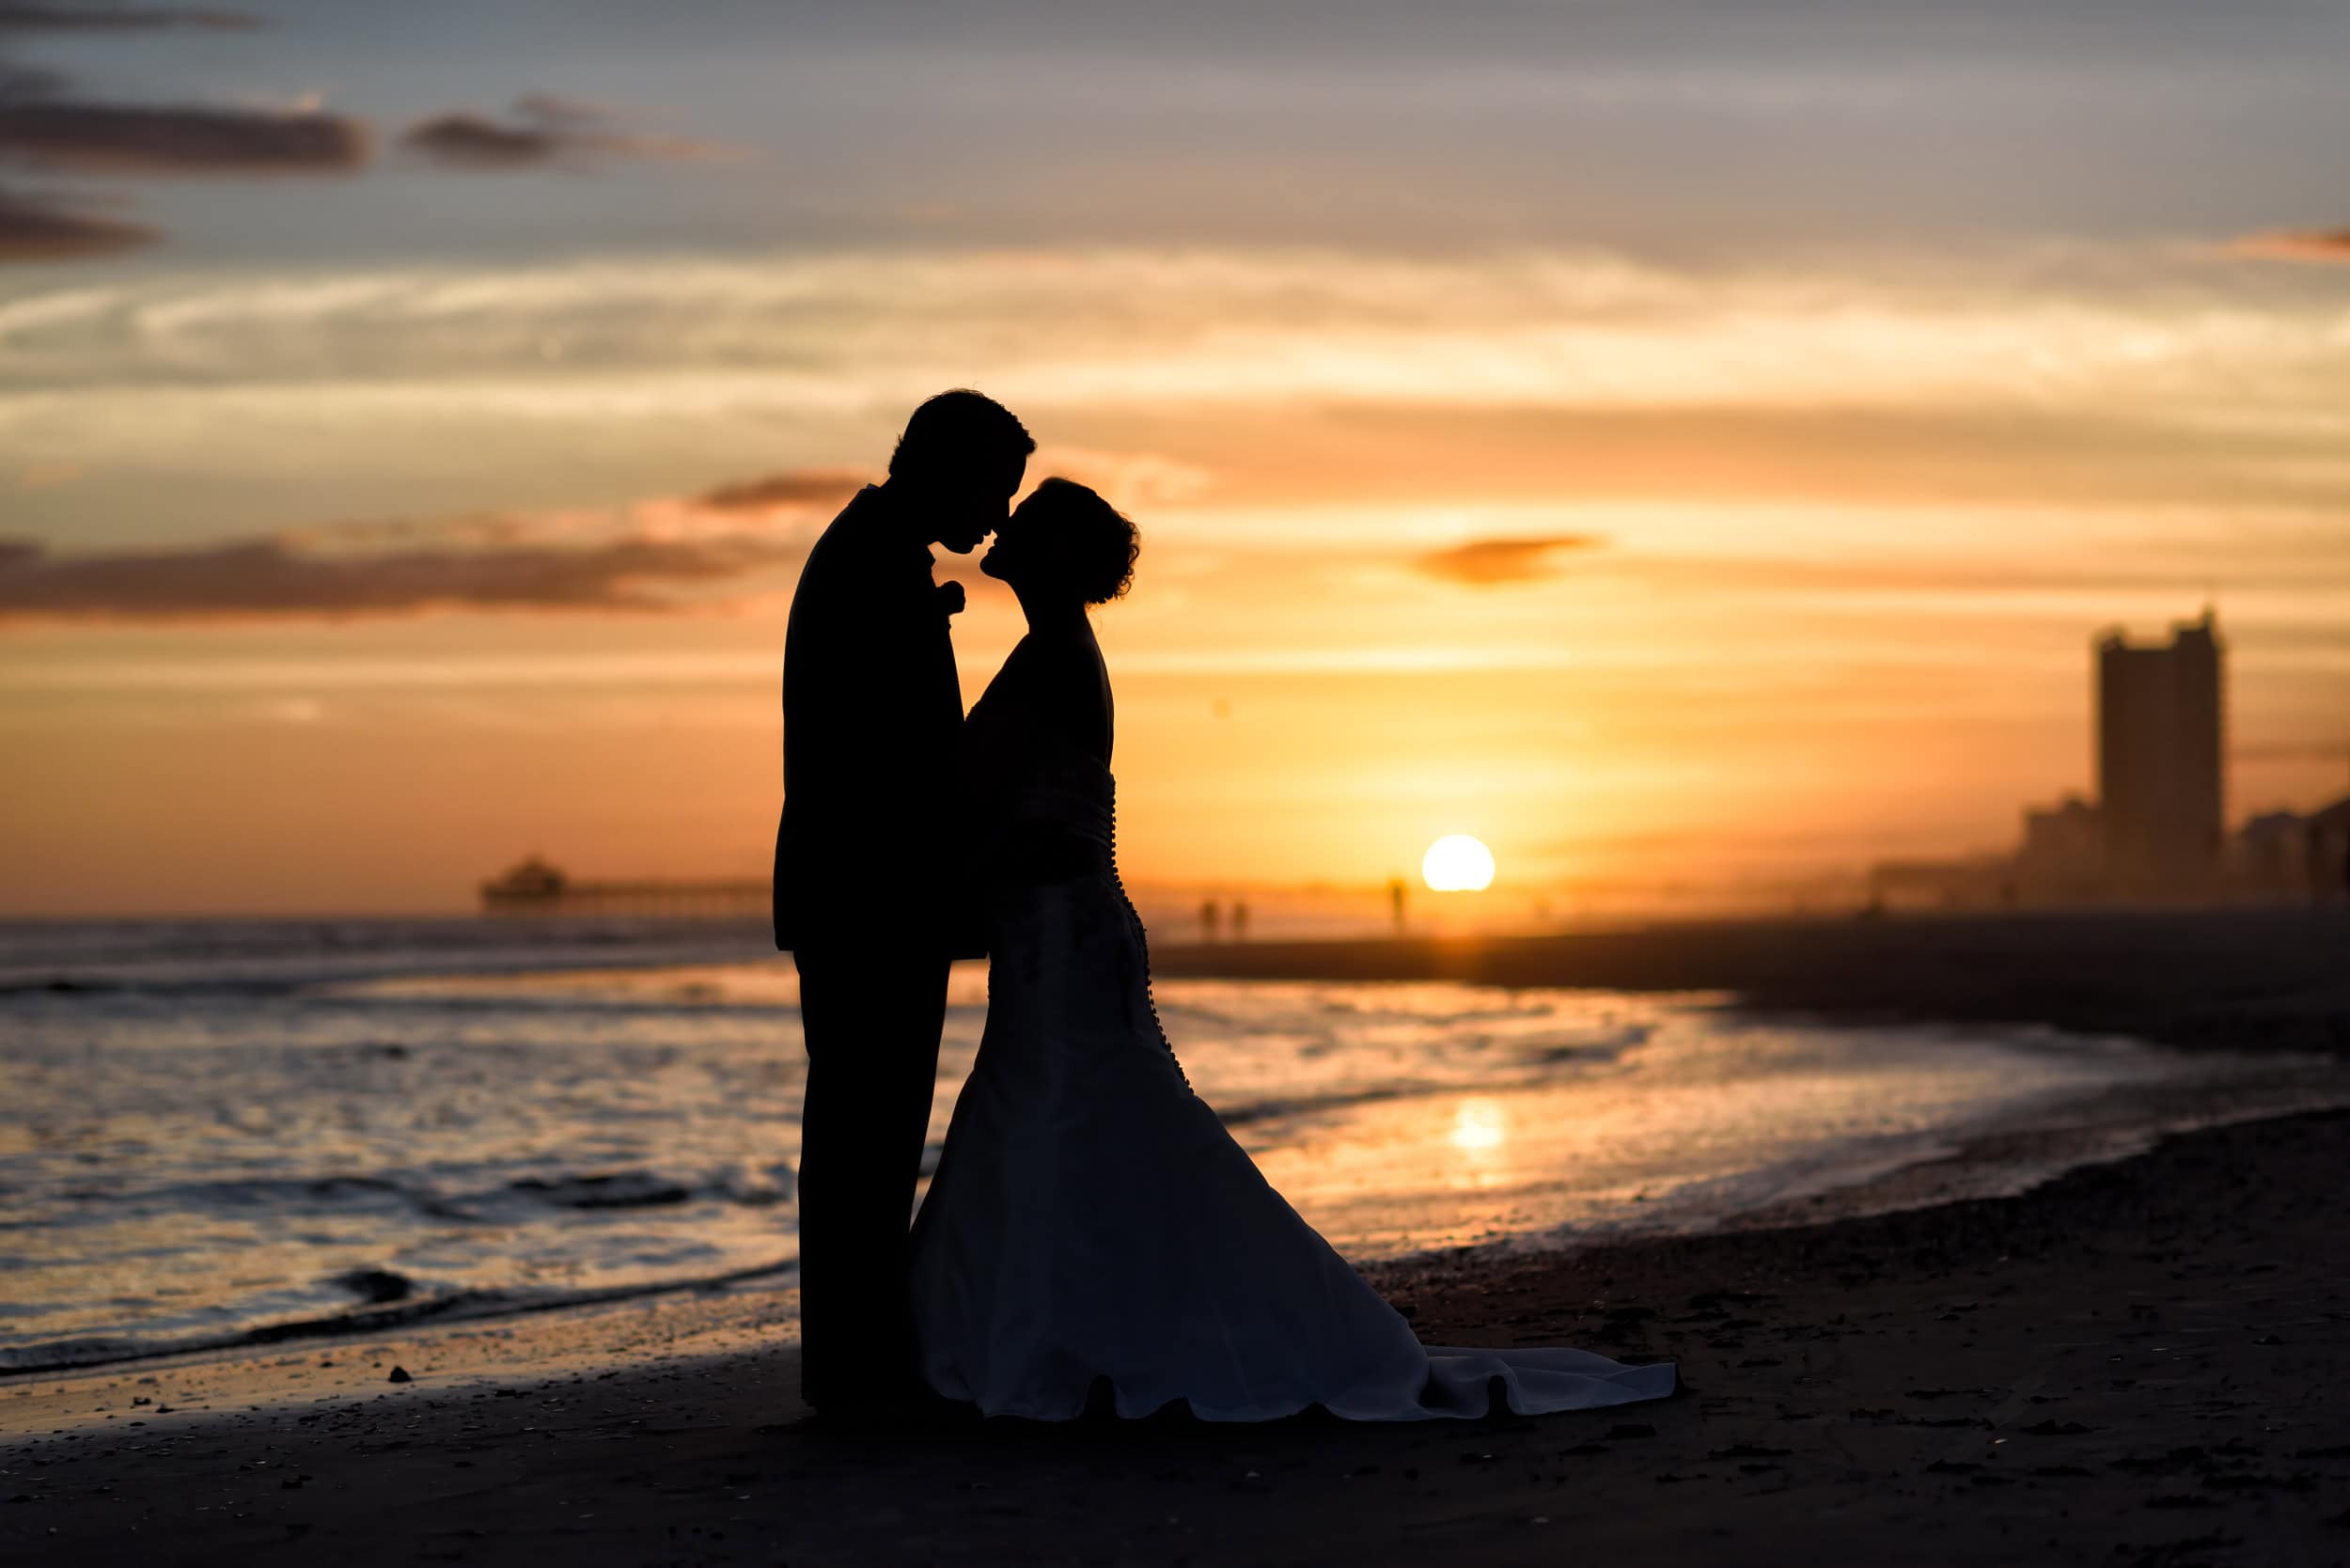 Bride and groom sunset silhouette - North Myrtle Beach